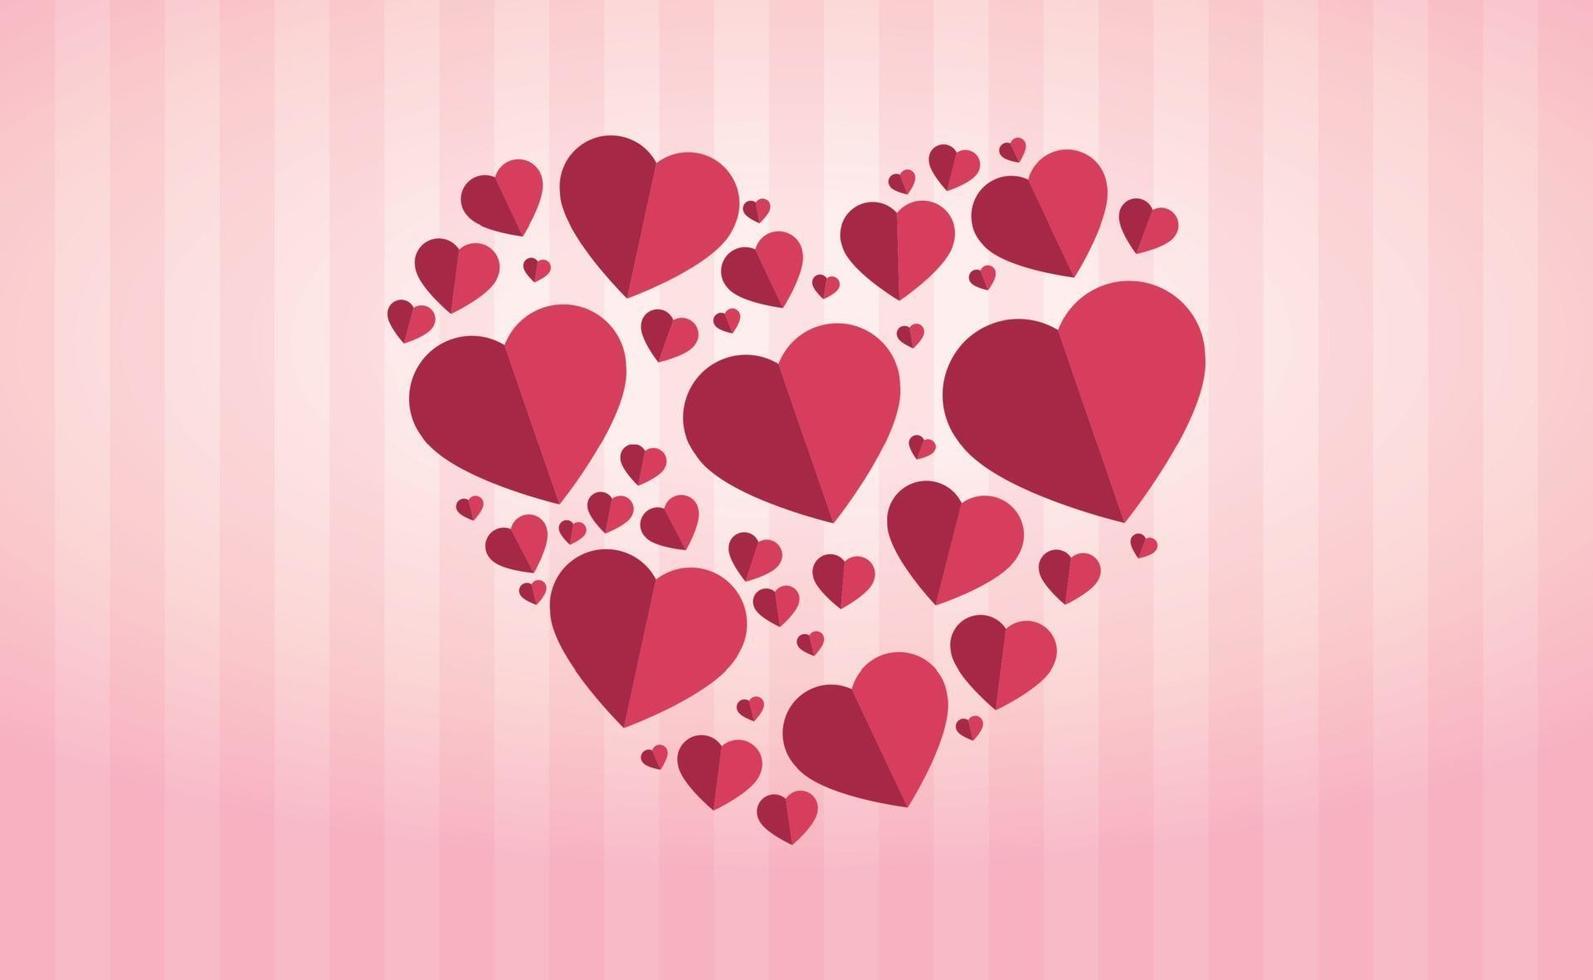 Gently pink-red hearts in the form of a big heart on a pink striped background vector